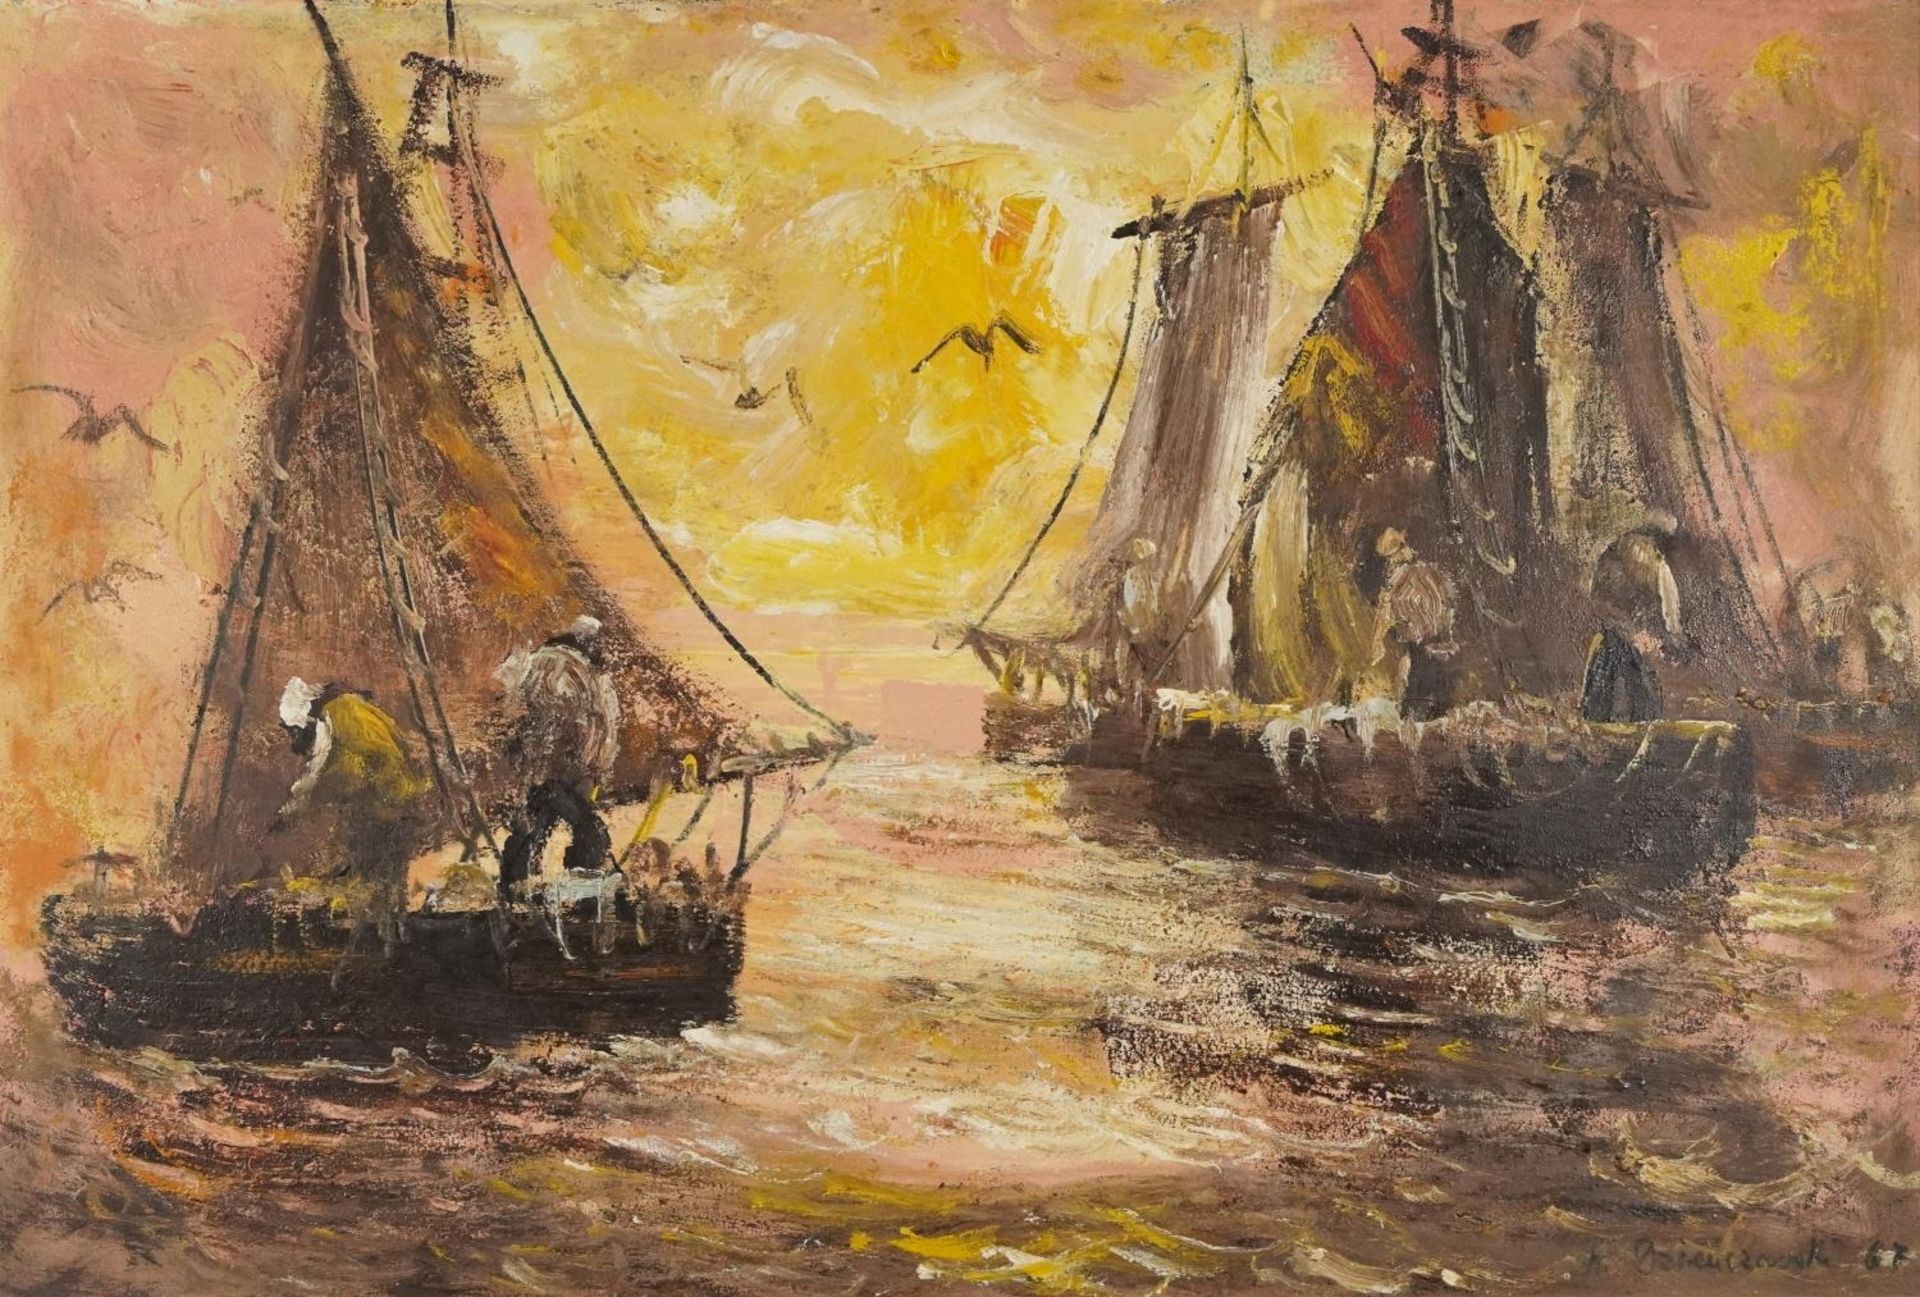 Fishing boats, 1960s European Impressionist oil on board, bearing an indistinct signature, Isioro